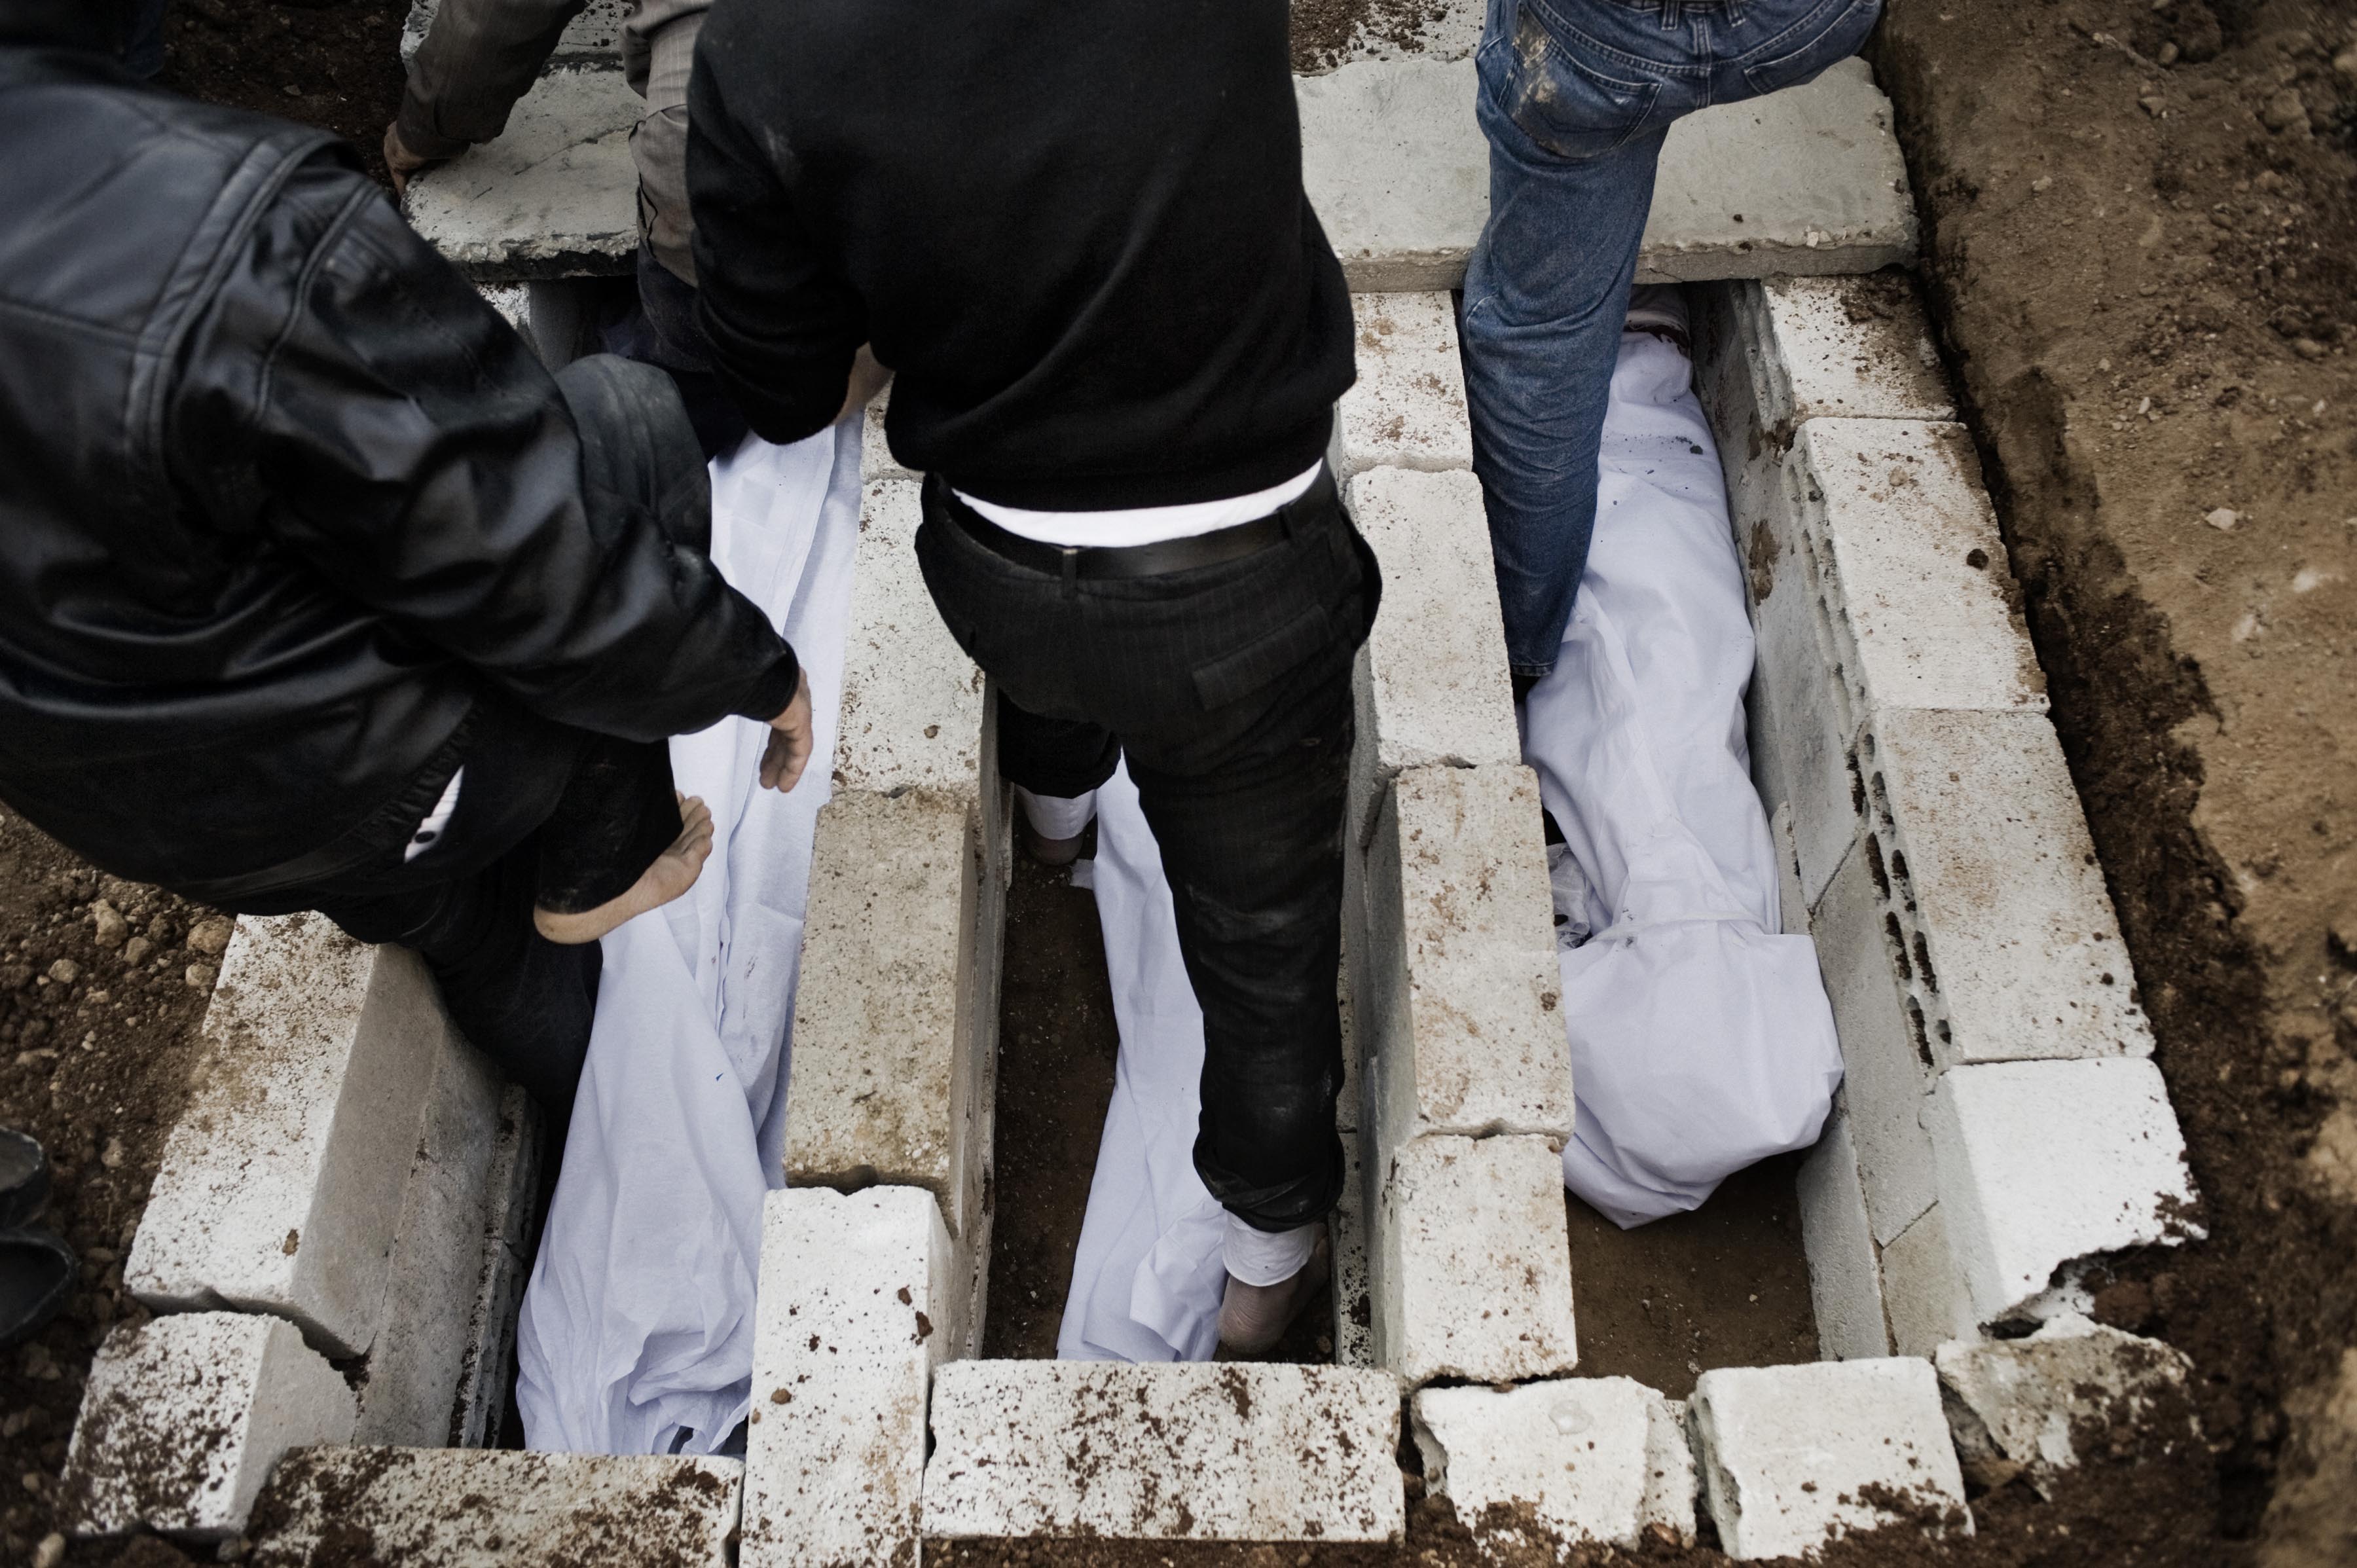 Feb. 20, 2012. Men prepare the graves of three shaheed (martyrs) killed by a mortar attack launched by Al Assad forces, among them two children, in Homs Province.